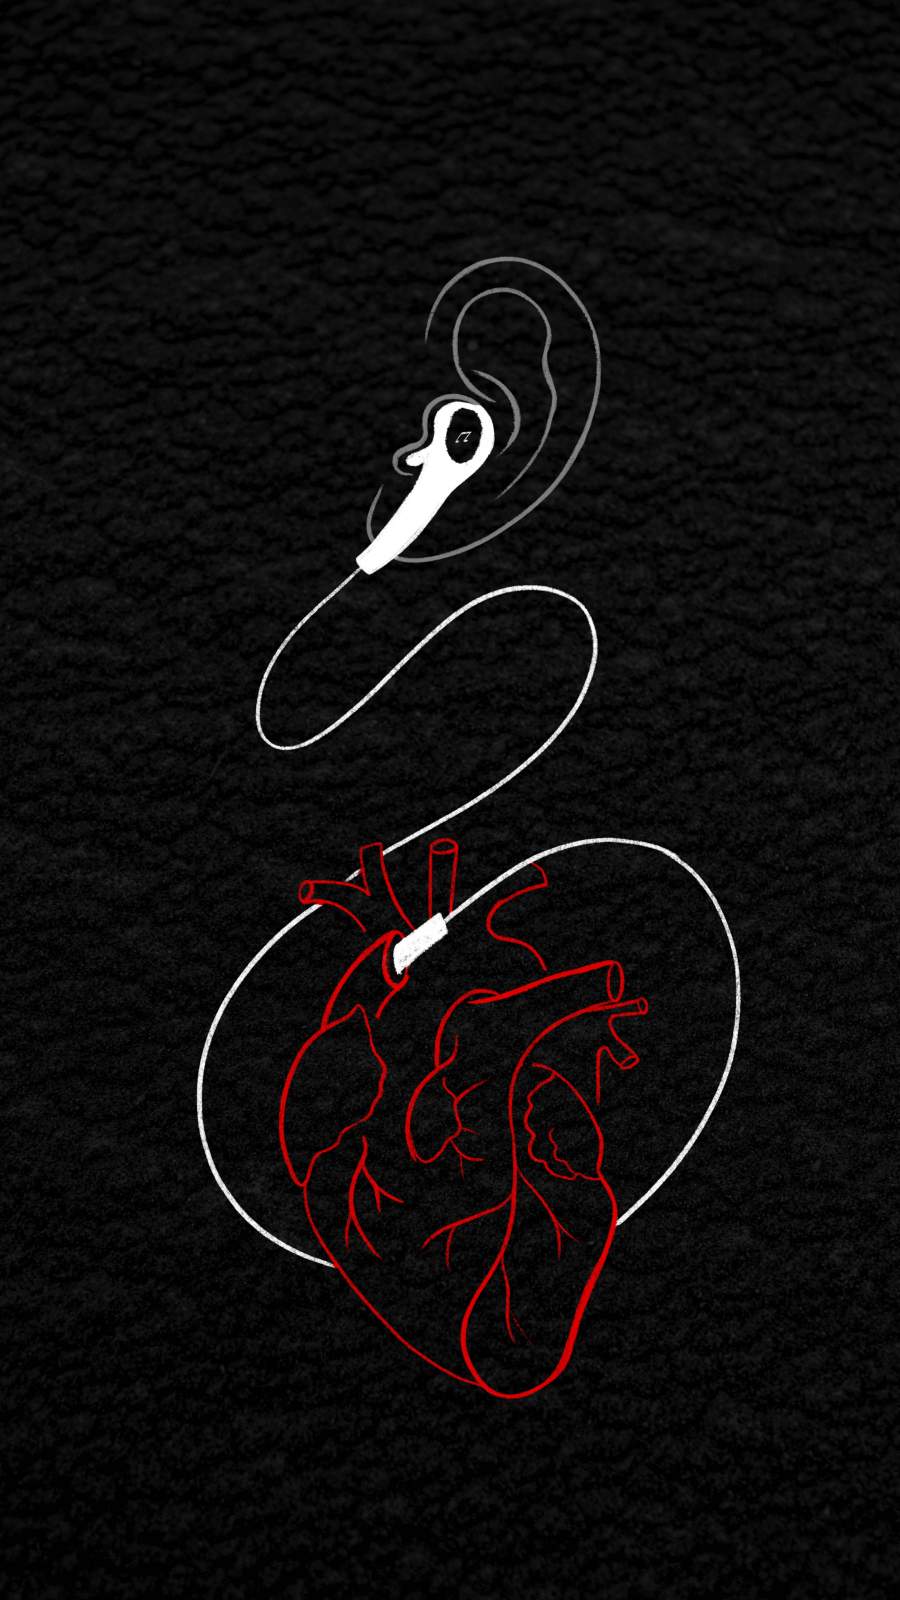 Music From Heart Iphone Wallpaper Iphone Wallpapers Iphone Wallpapers